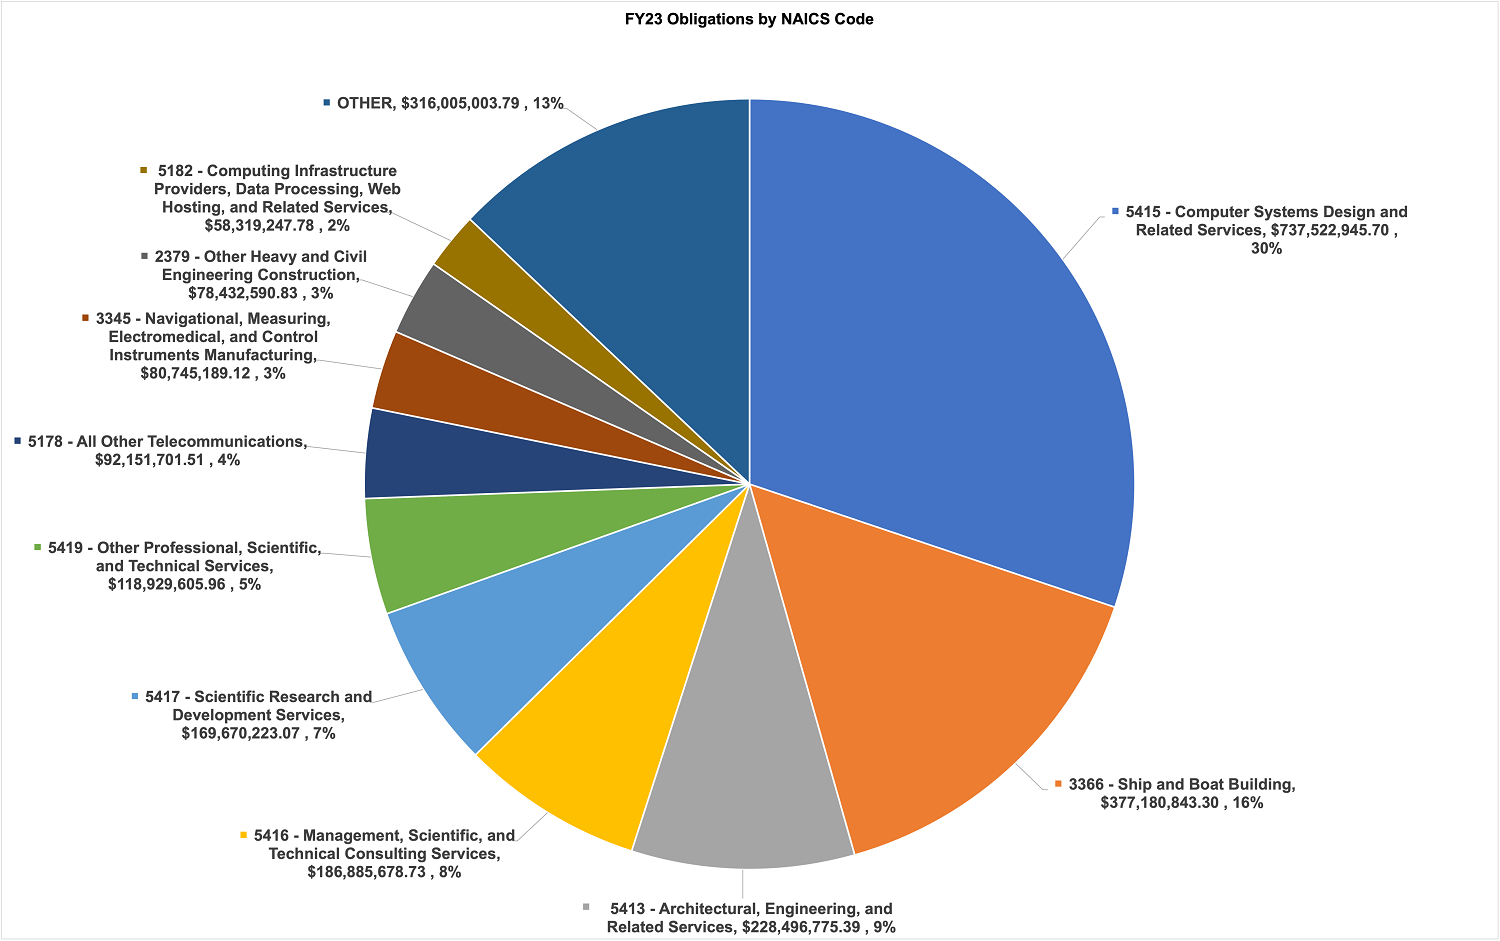 Pie chart showing NOAA FY23 Obligations by NAICS Code: 5415 - Computer Systems Design and Related Services; $737,522,945.70 (30.2%); 3366 - Ship and Boat Building; $377,180,843.30 (15.4%); 5413 - Architectural, Engineering, and Related Services; $228,496,775.39; ((9.3%); 5416 - Management, Scientific, and Technical Consulting Services; $186,885,678.73 (7.6%); 5417 - Scientific Research and Development Services; $169,670,223.07 (6.9%)